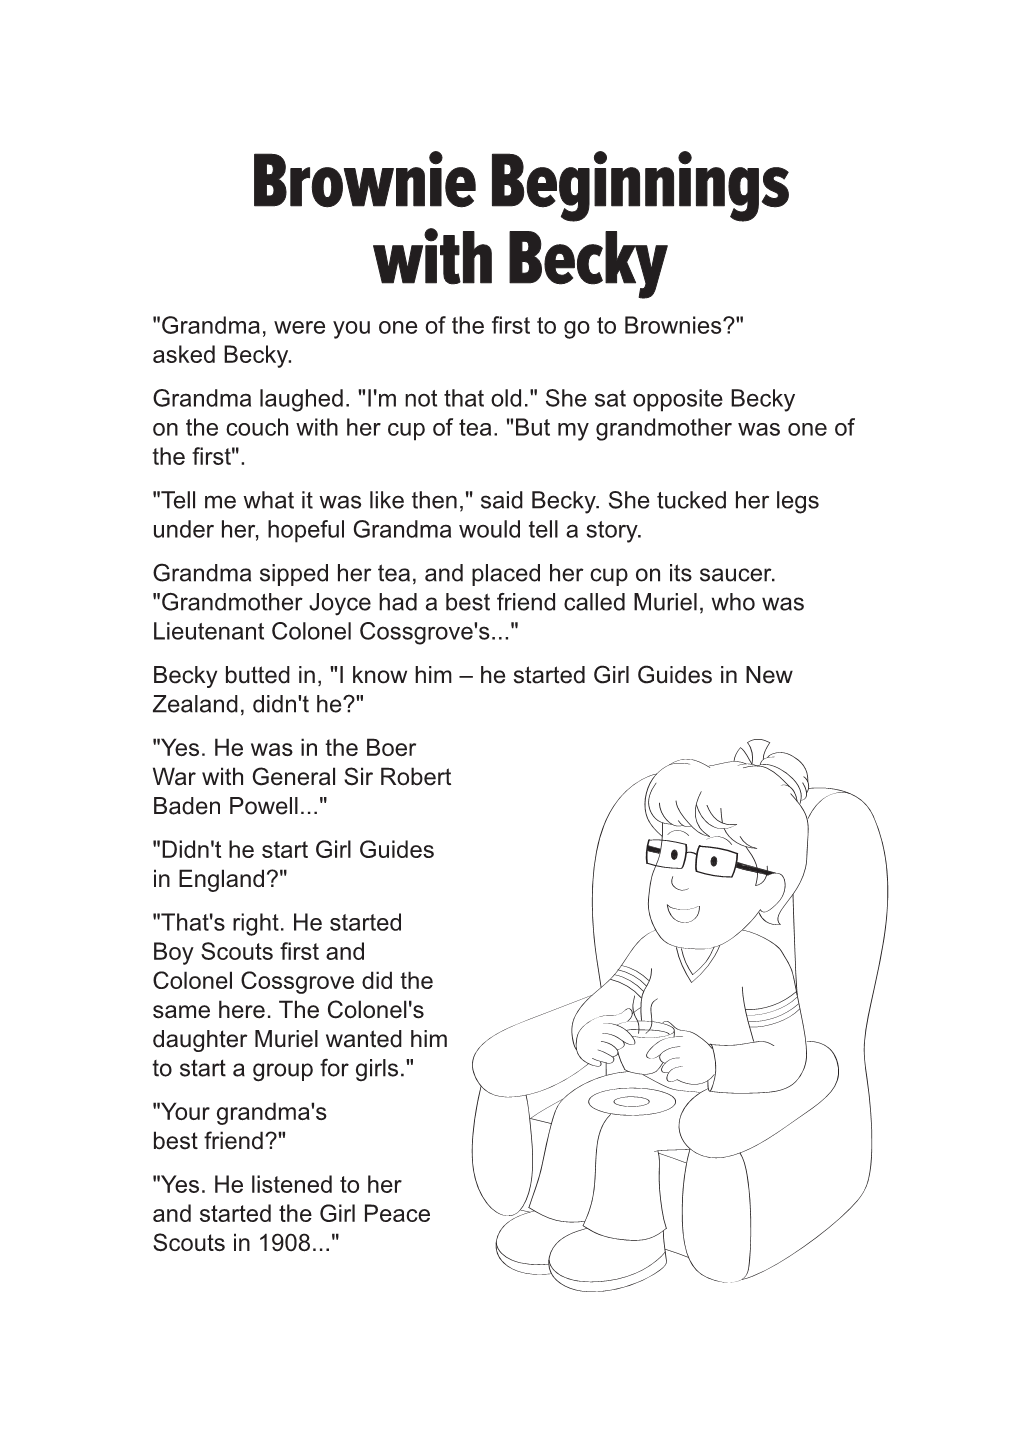 Brownie Beginnings with Becky "Grandma, Were You One of the First to Go to Brownies?" Asked Becky